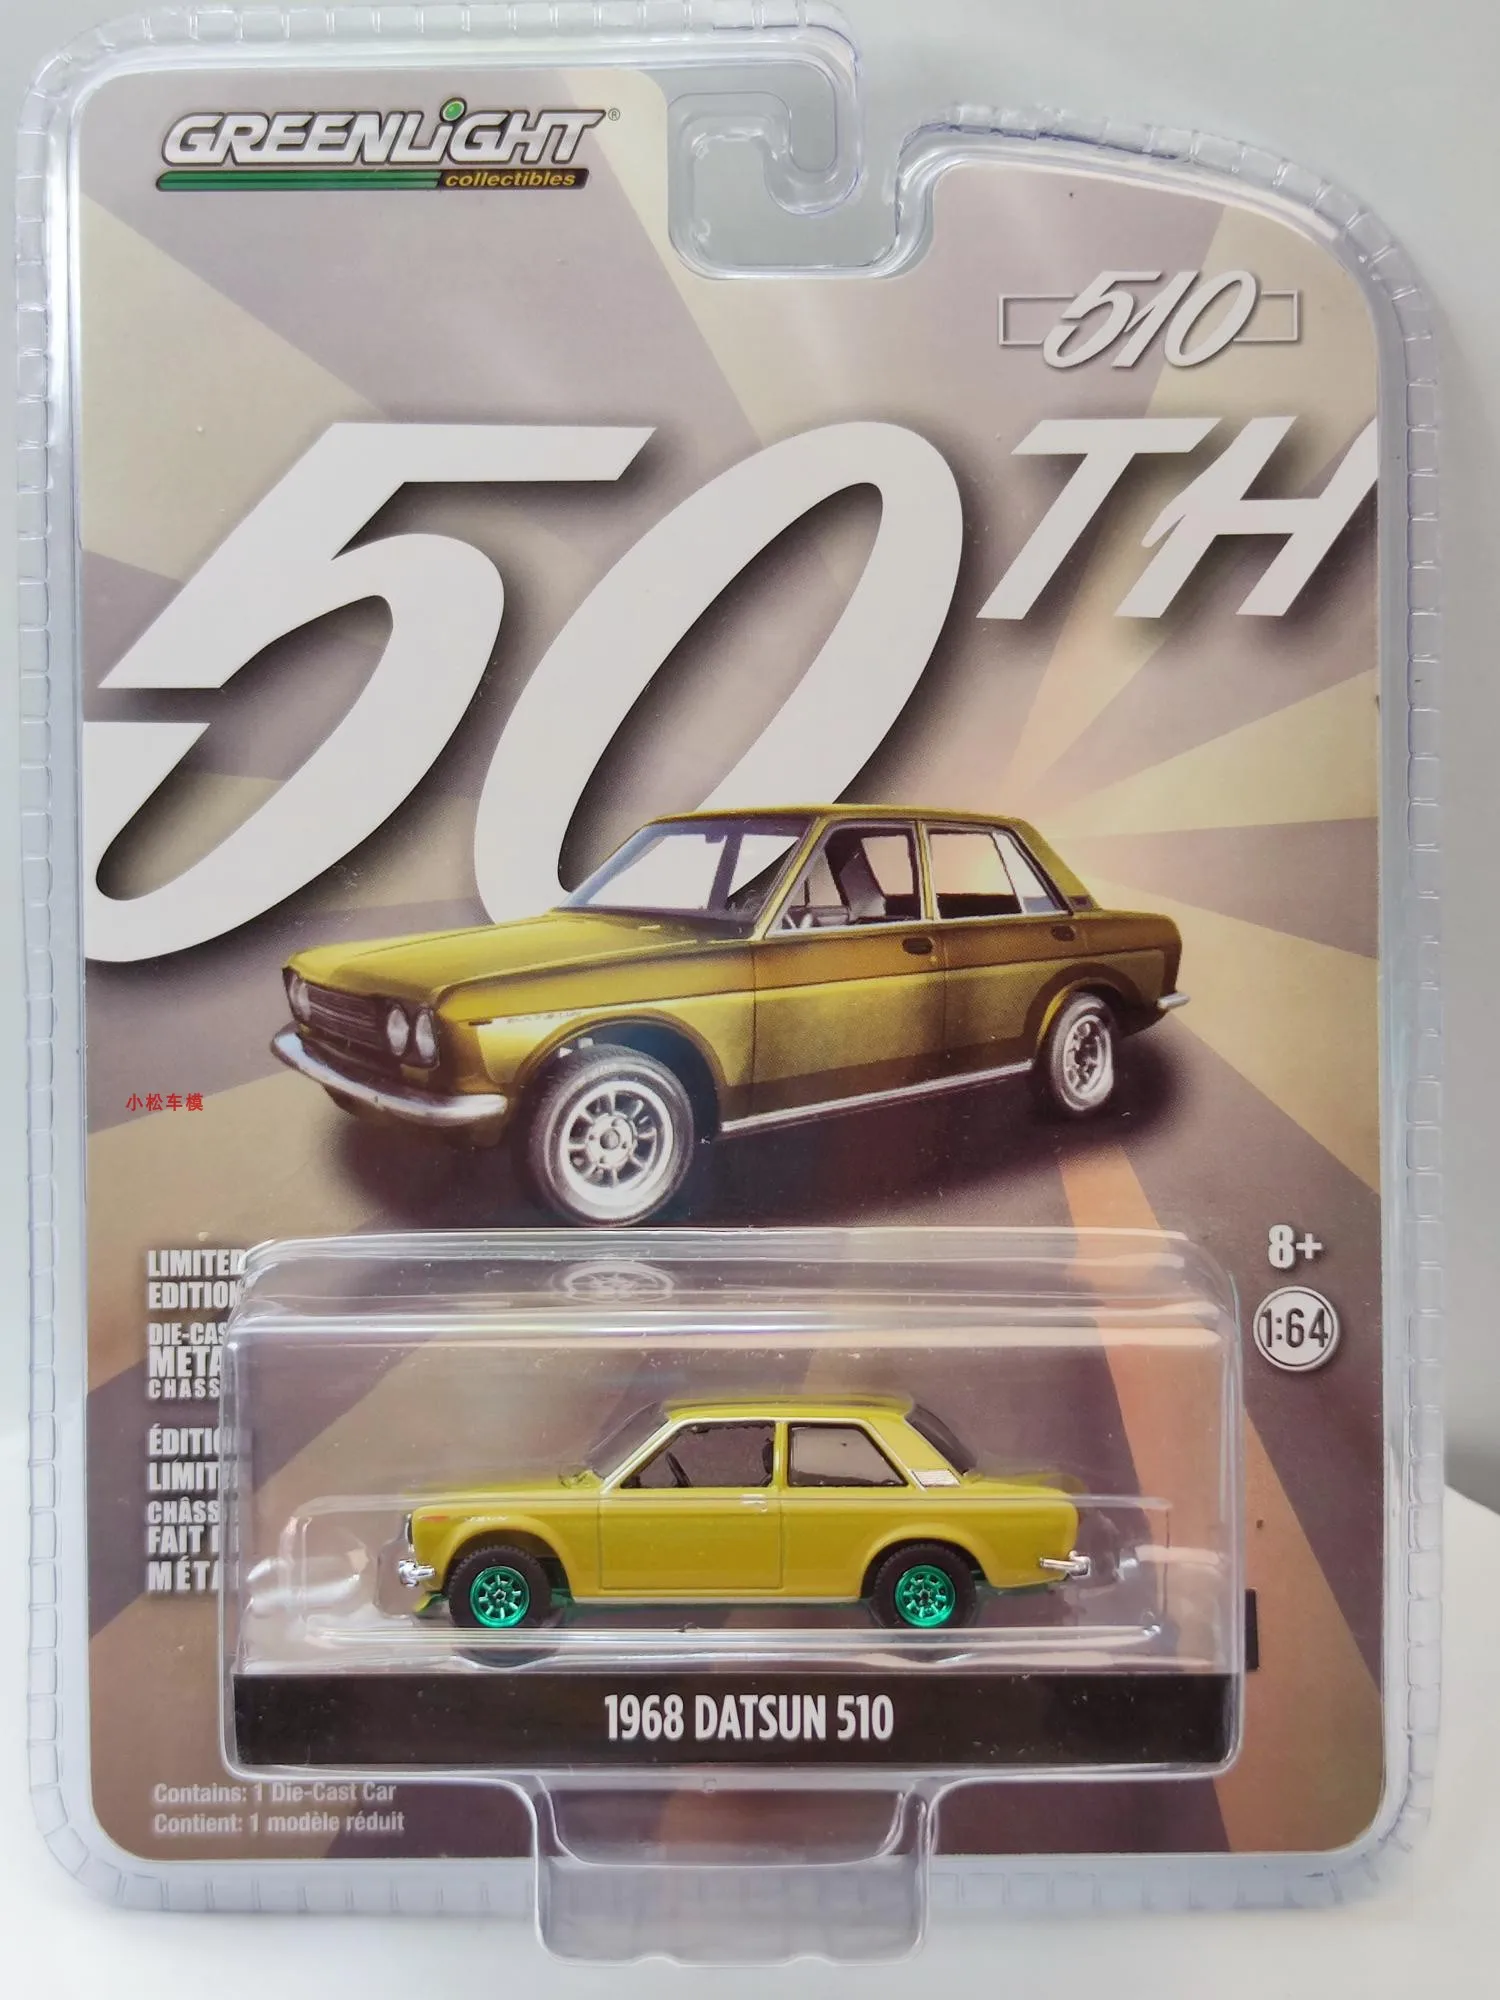 

1:64 1968 Datsun 510 Large Departure Green Edition Collection of car models